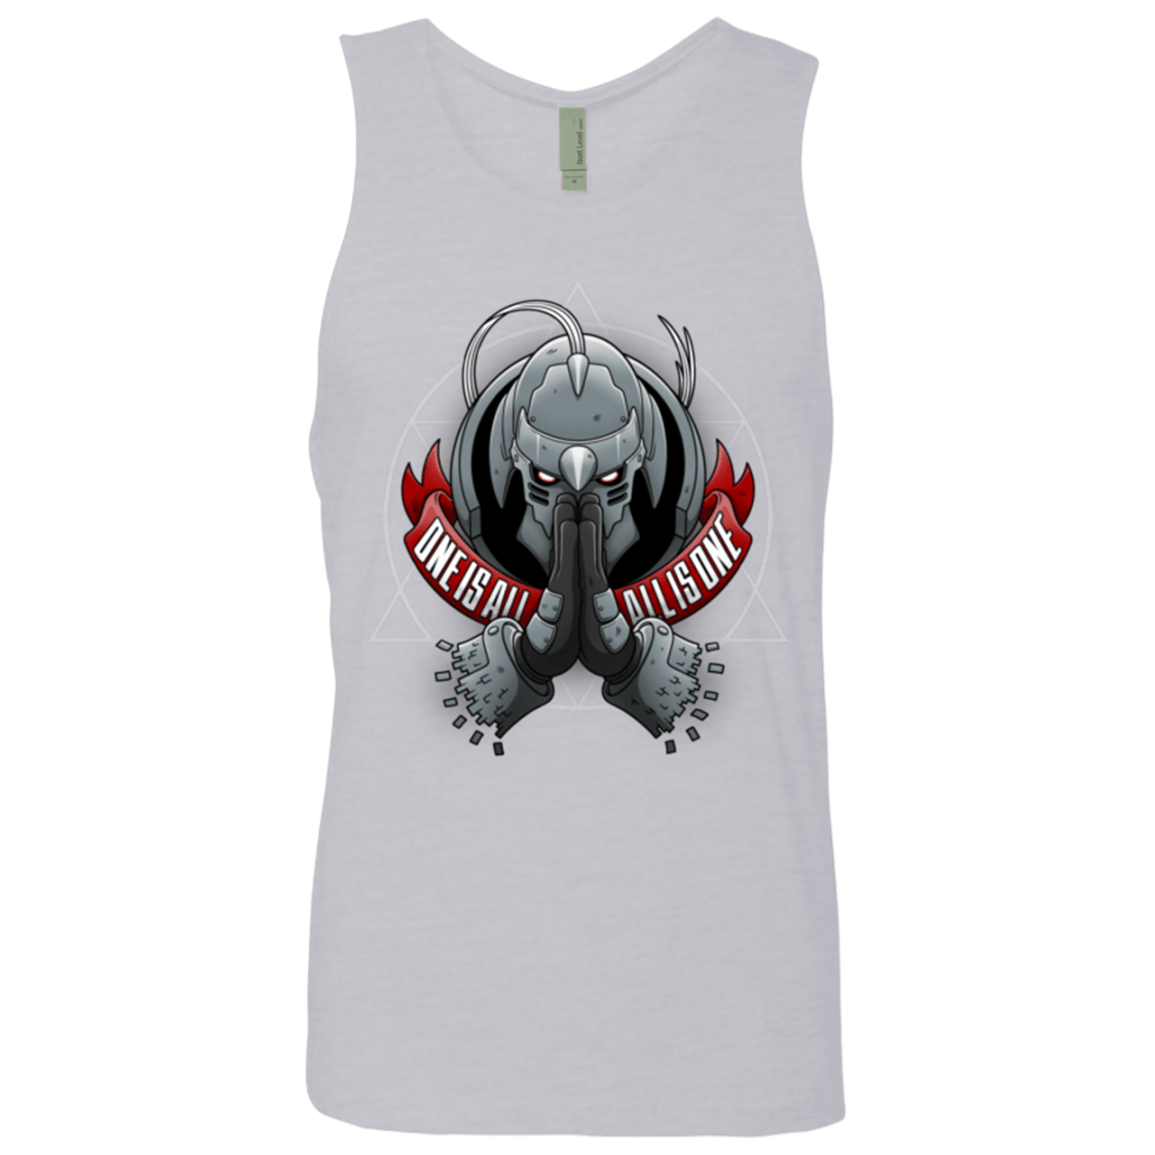 T-Shirts Heather Grey / Small ONE IS ALL ALL IS ONE Men's Premium Tank Top